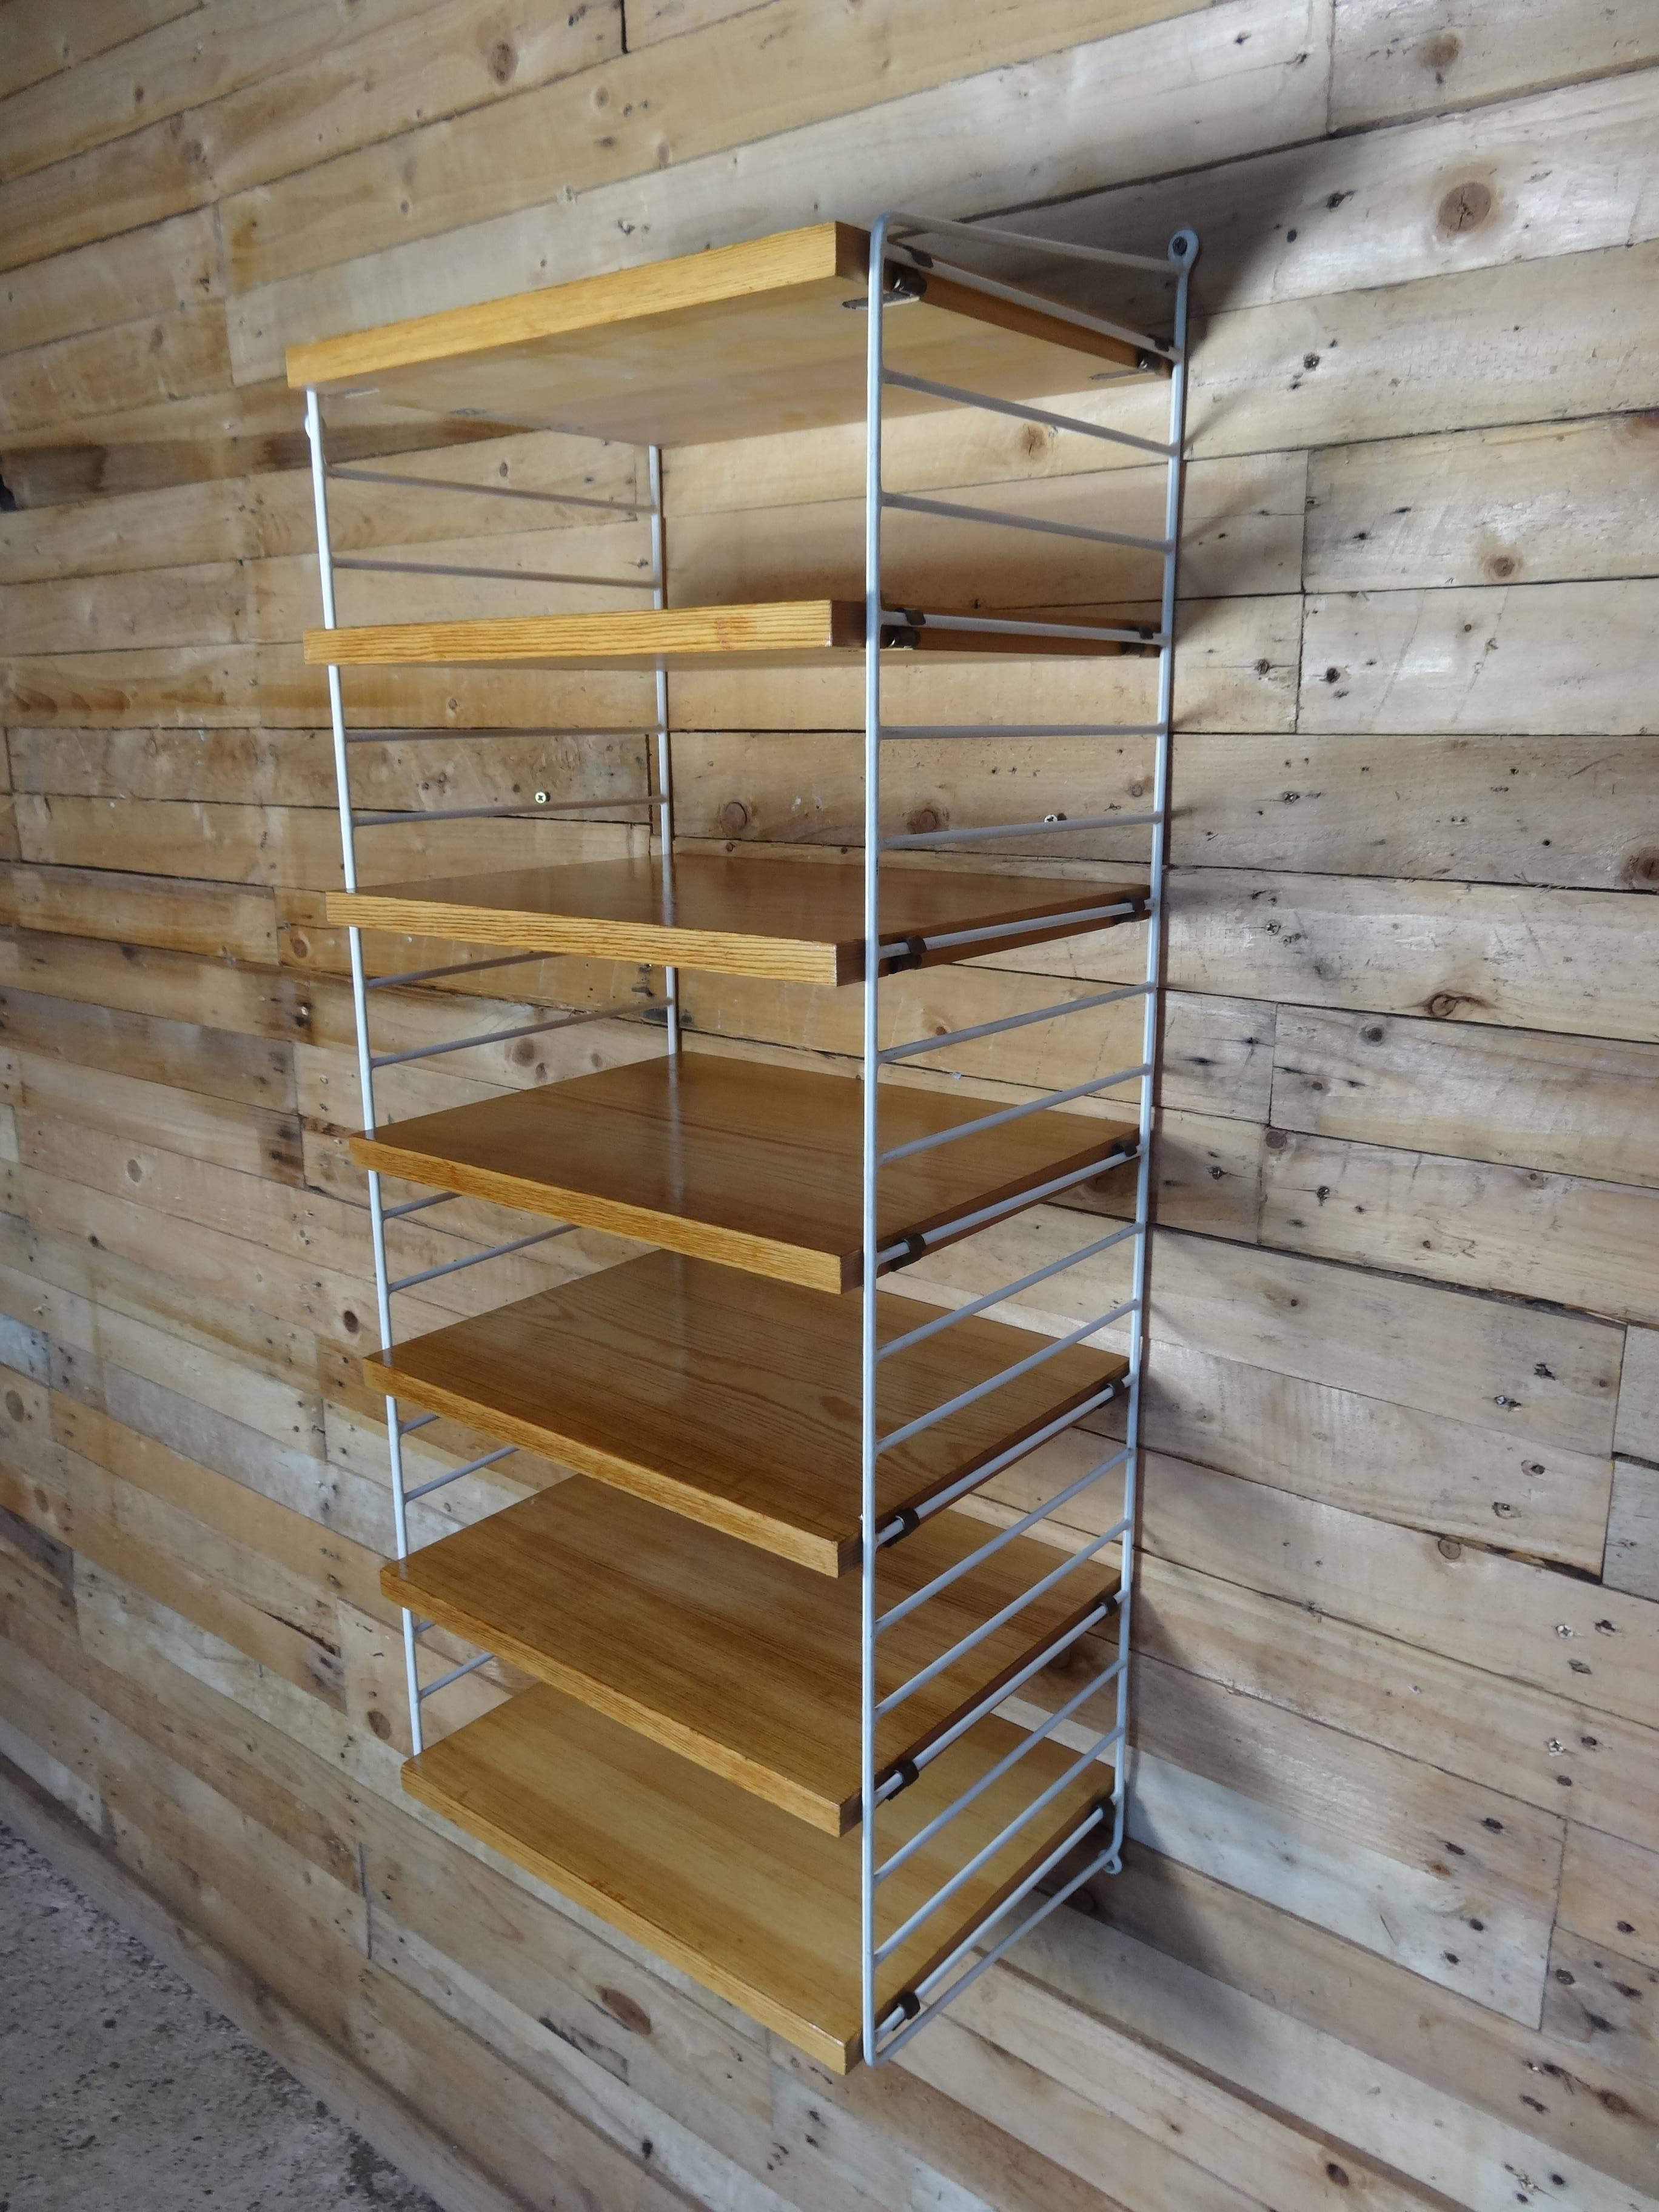 Retro 1950s tall string wall system shelving unit.

Early string wall system in very good vintage condition. The string wall system was designed in 1949. Over the years it has evolved from being a ground-breaking concept to becoming one of the